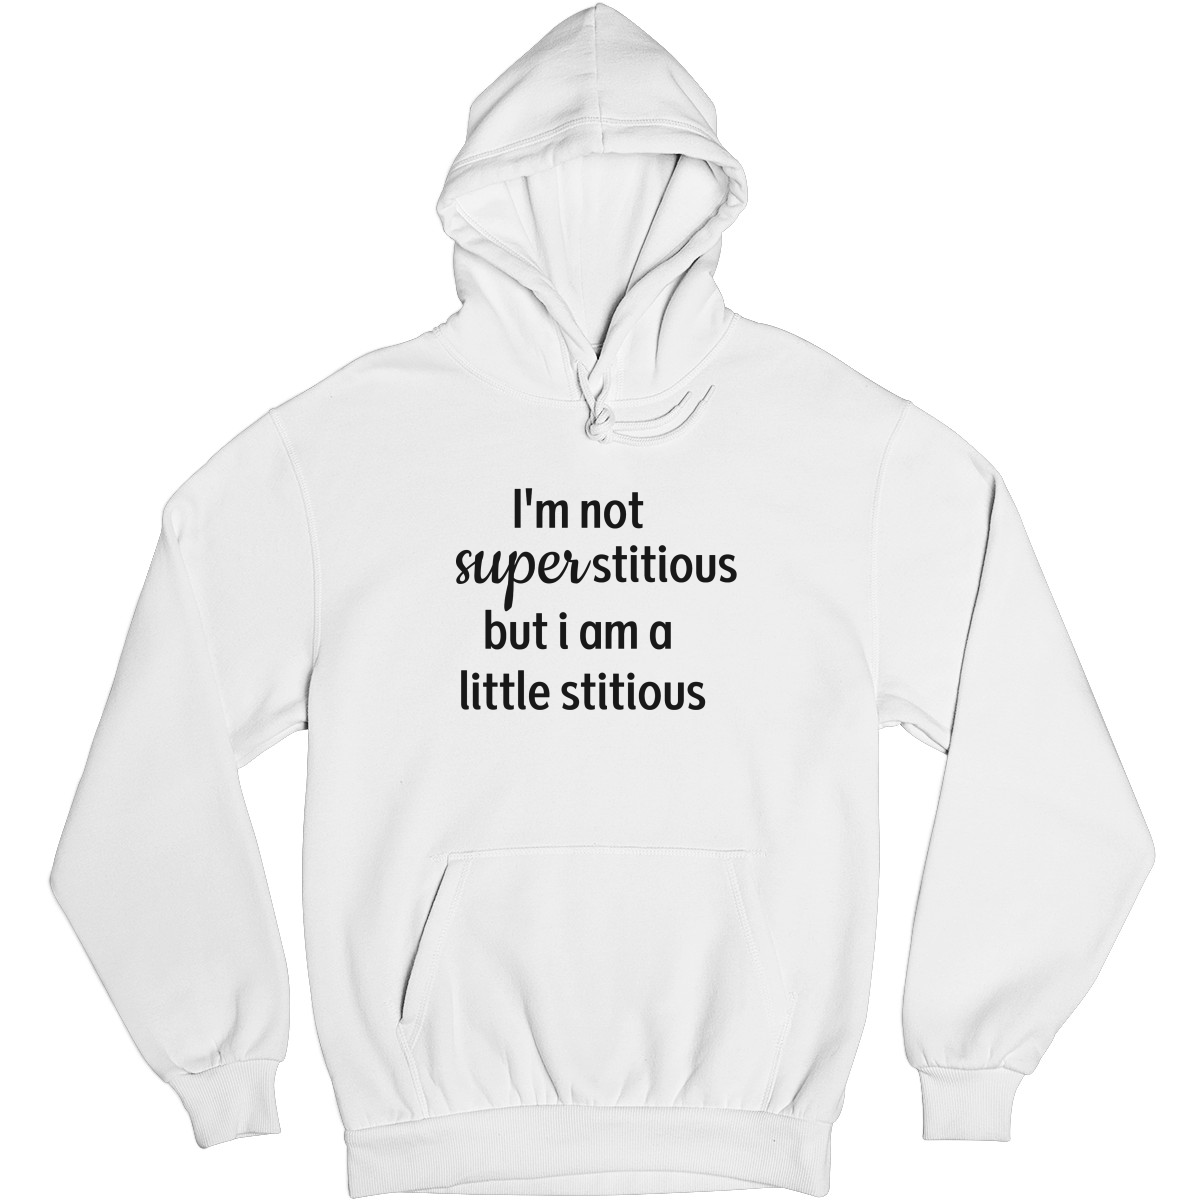 I'm Not Superstitious but I am a Little Stitious Unisex Hoodie | White